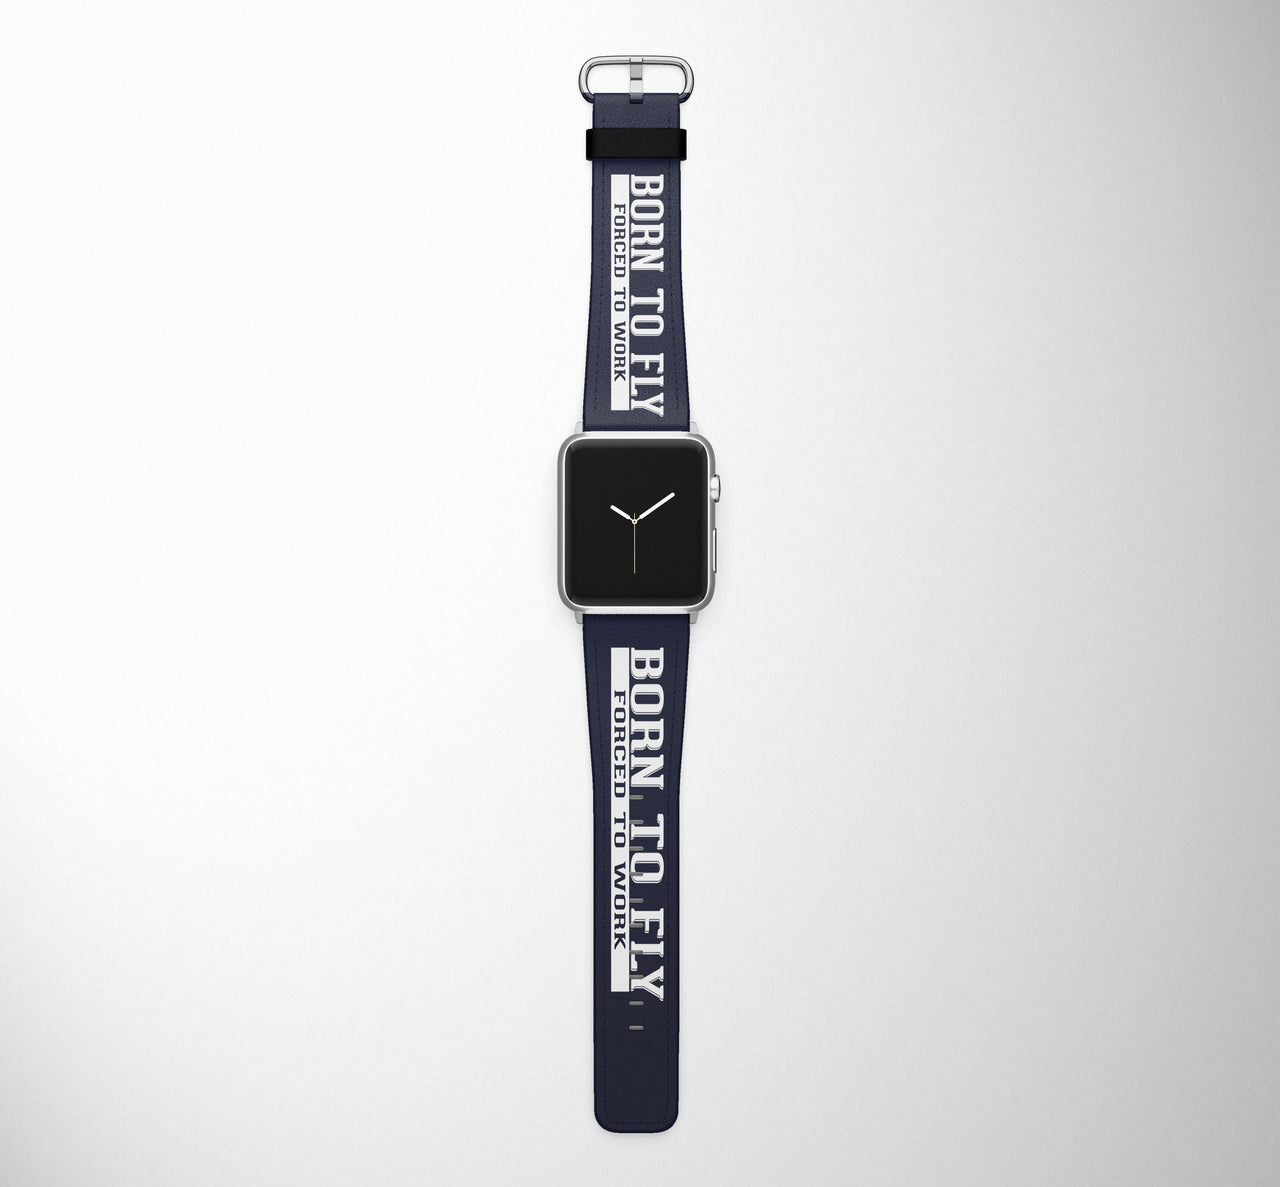 Born To Fly - Forced to Work Designed Leather Apple Watch Straps